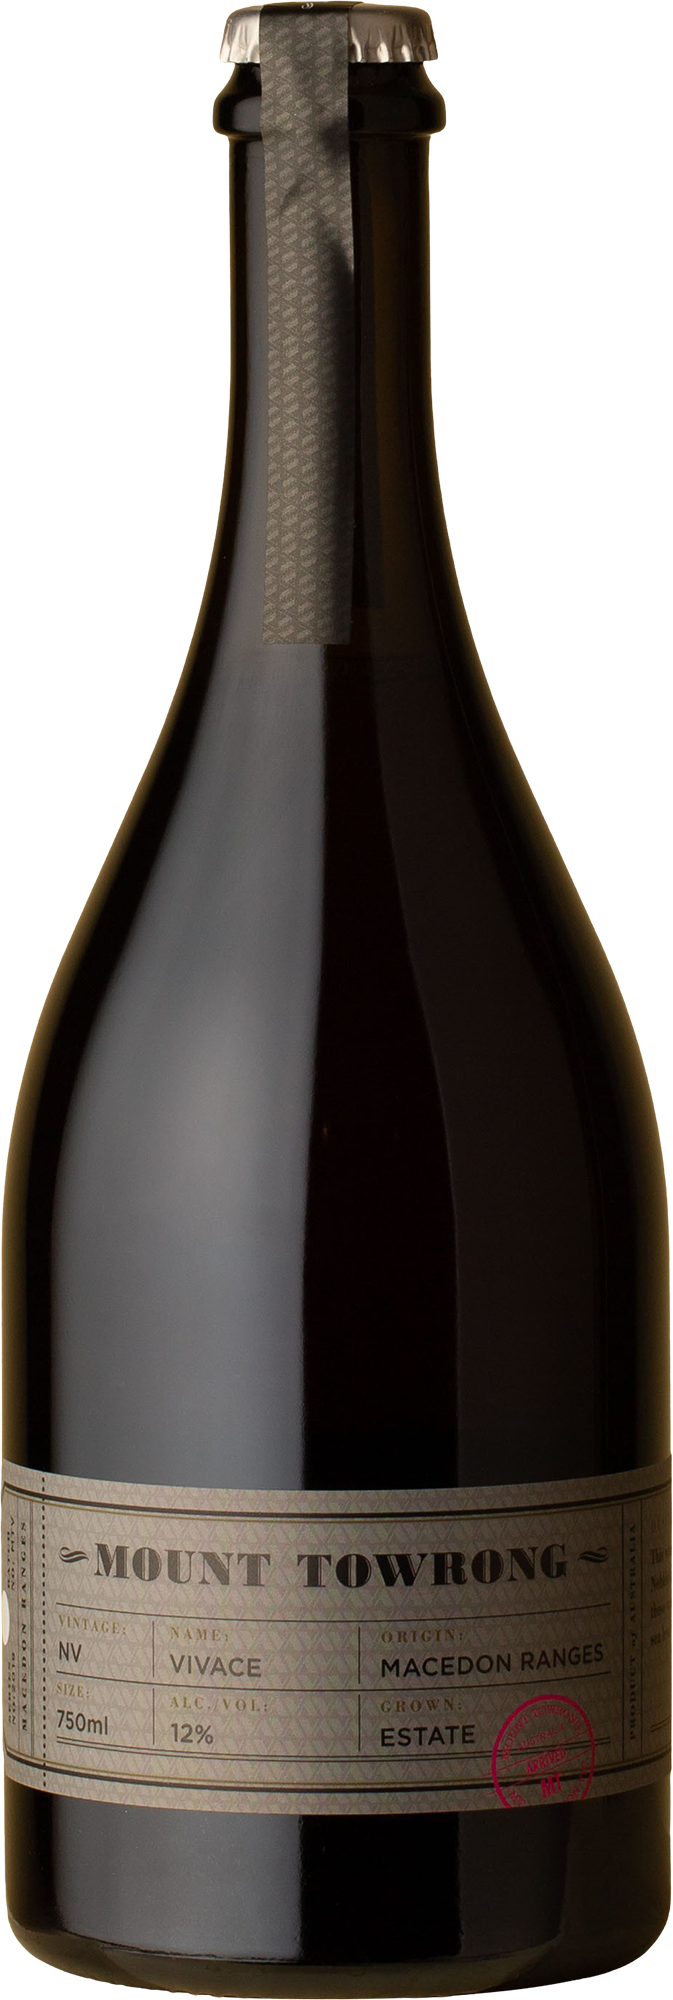 Mount Towrong - Vivace 2020 Sparkling Wine